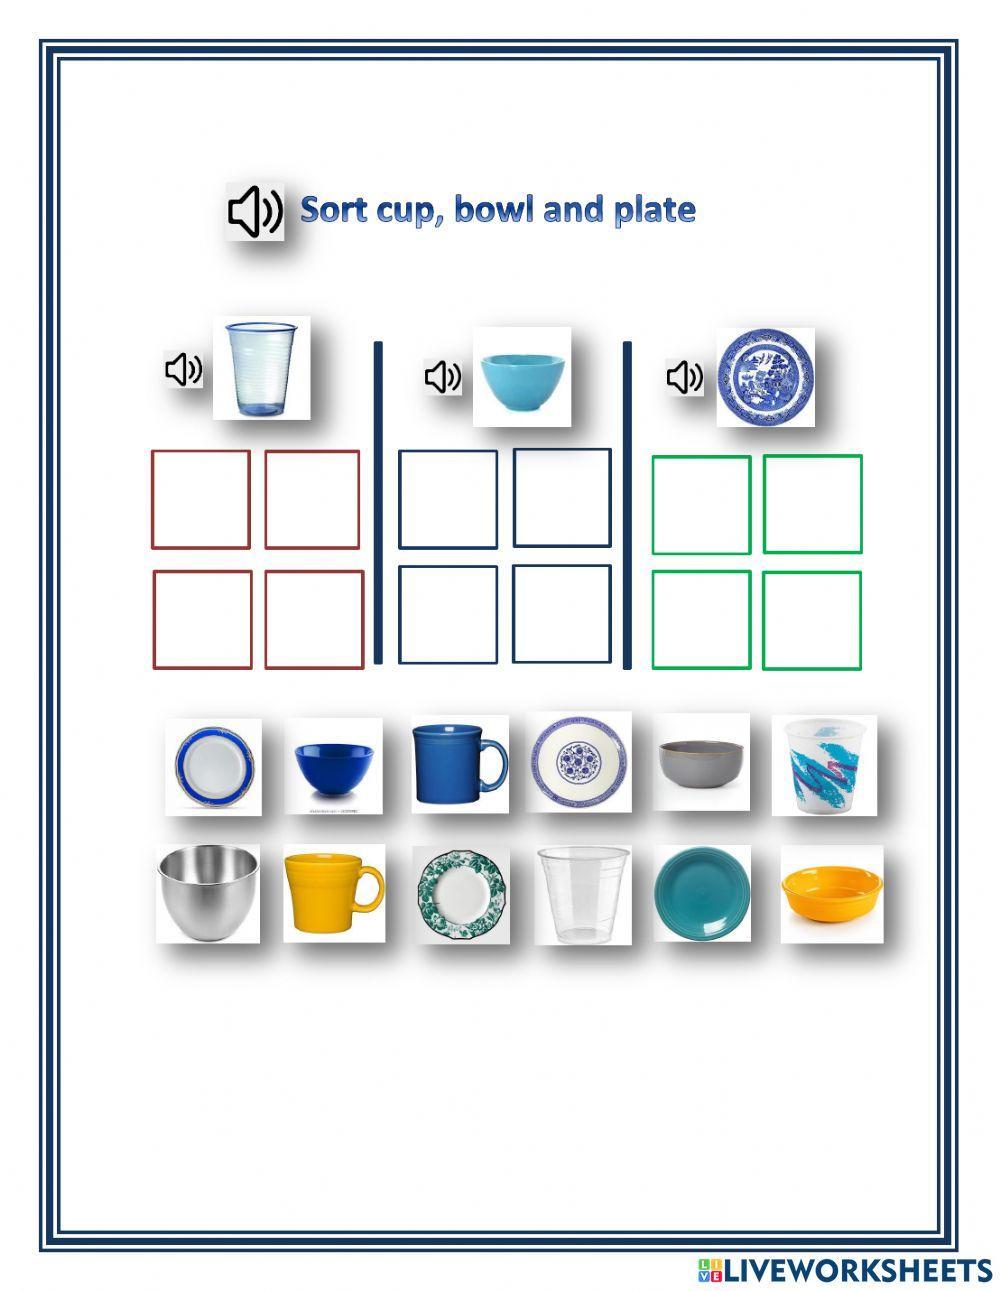 Sort cup, bowl and plate - 1.01 - DC